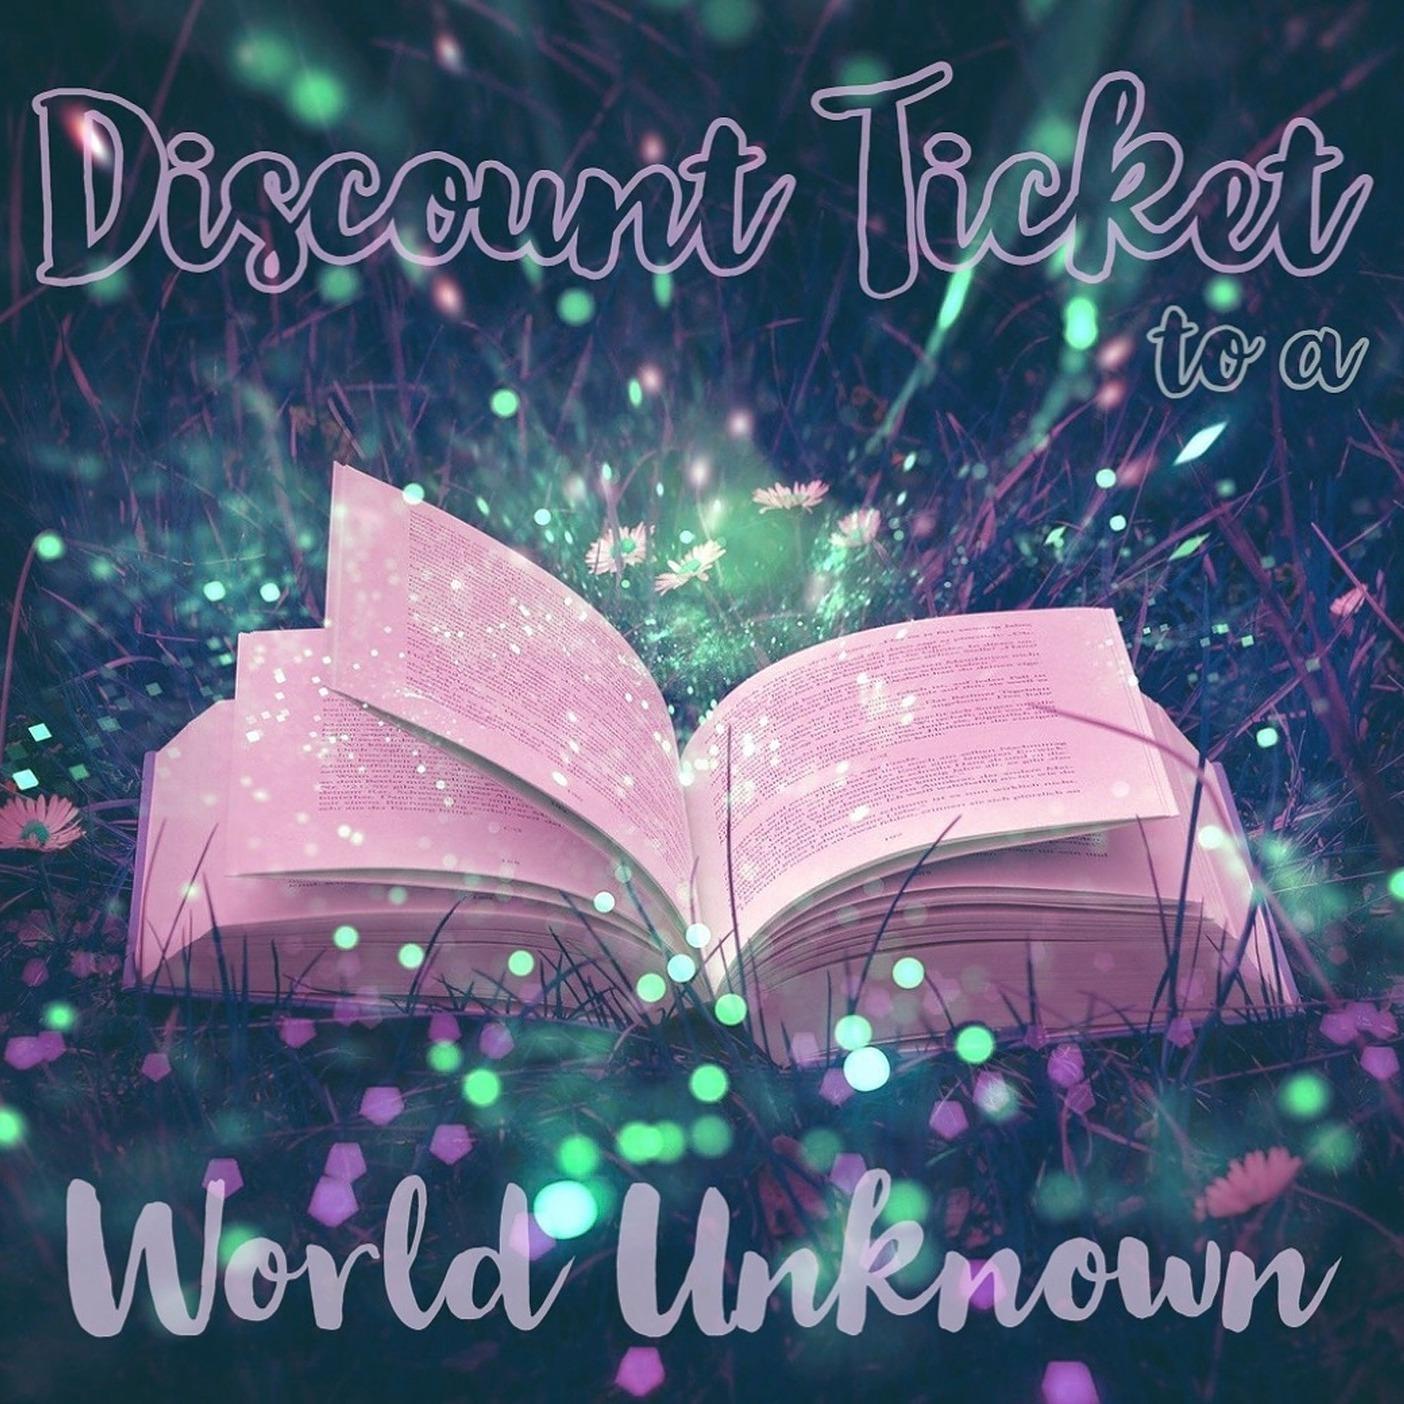 Discount Ticket to a World Unknown